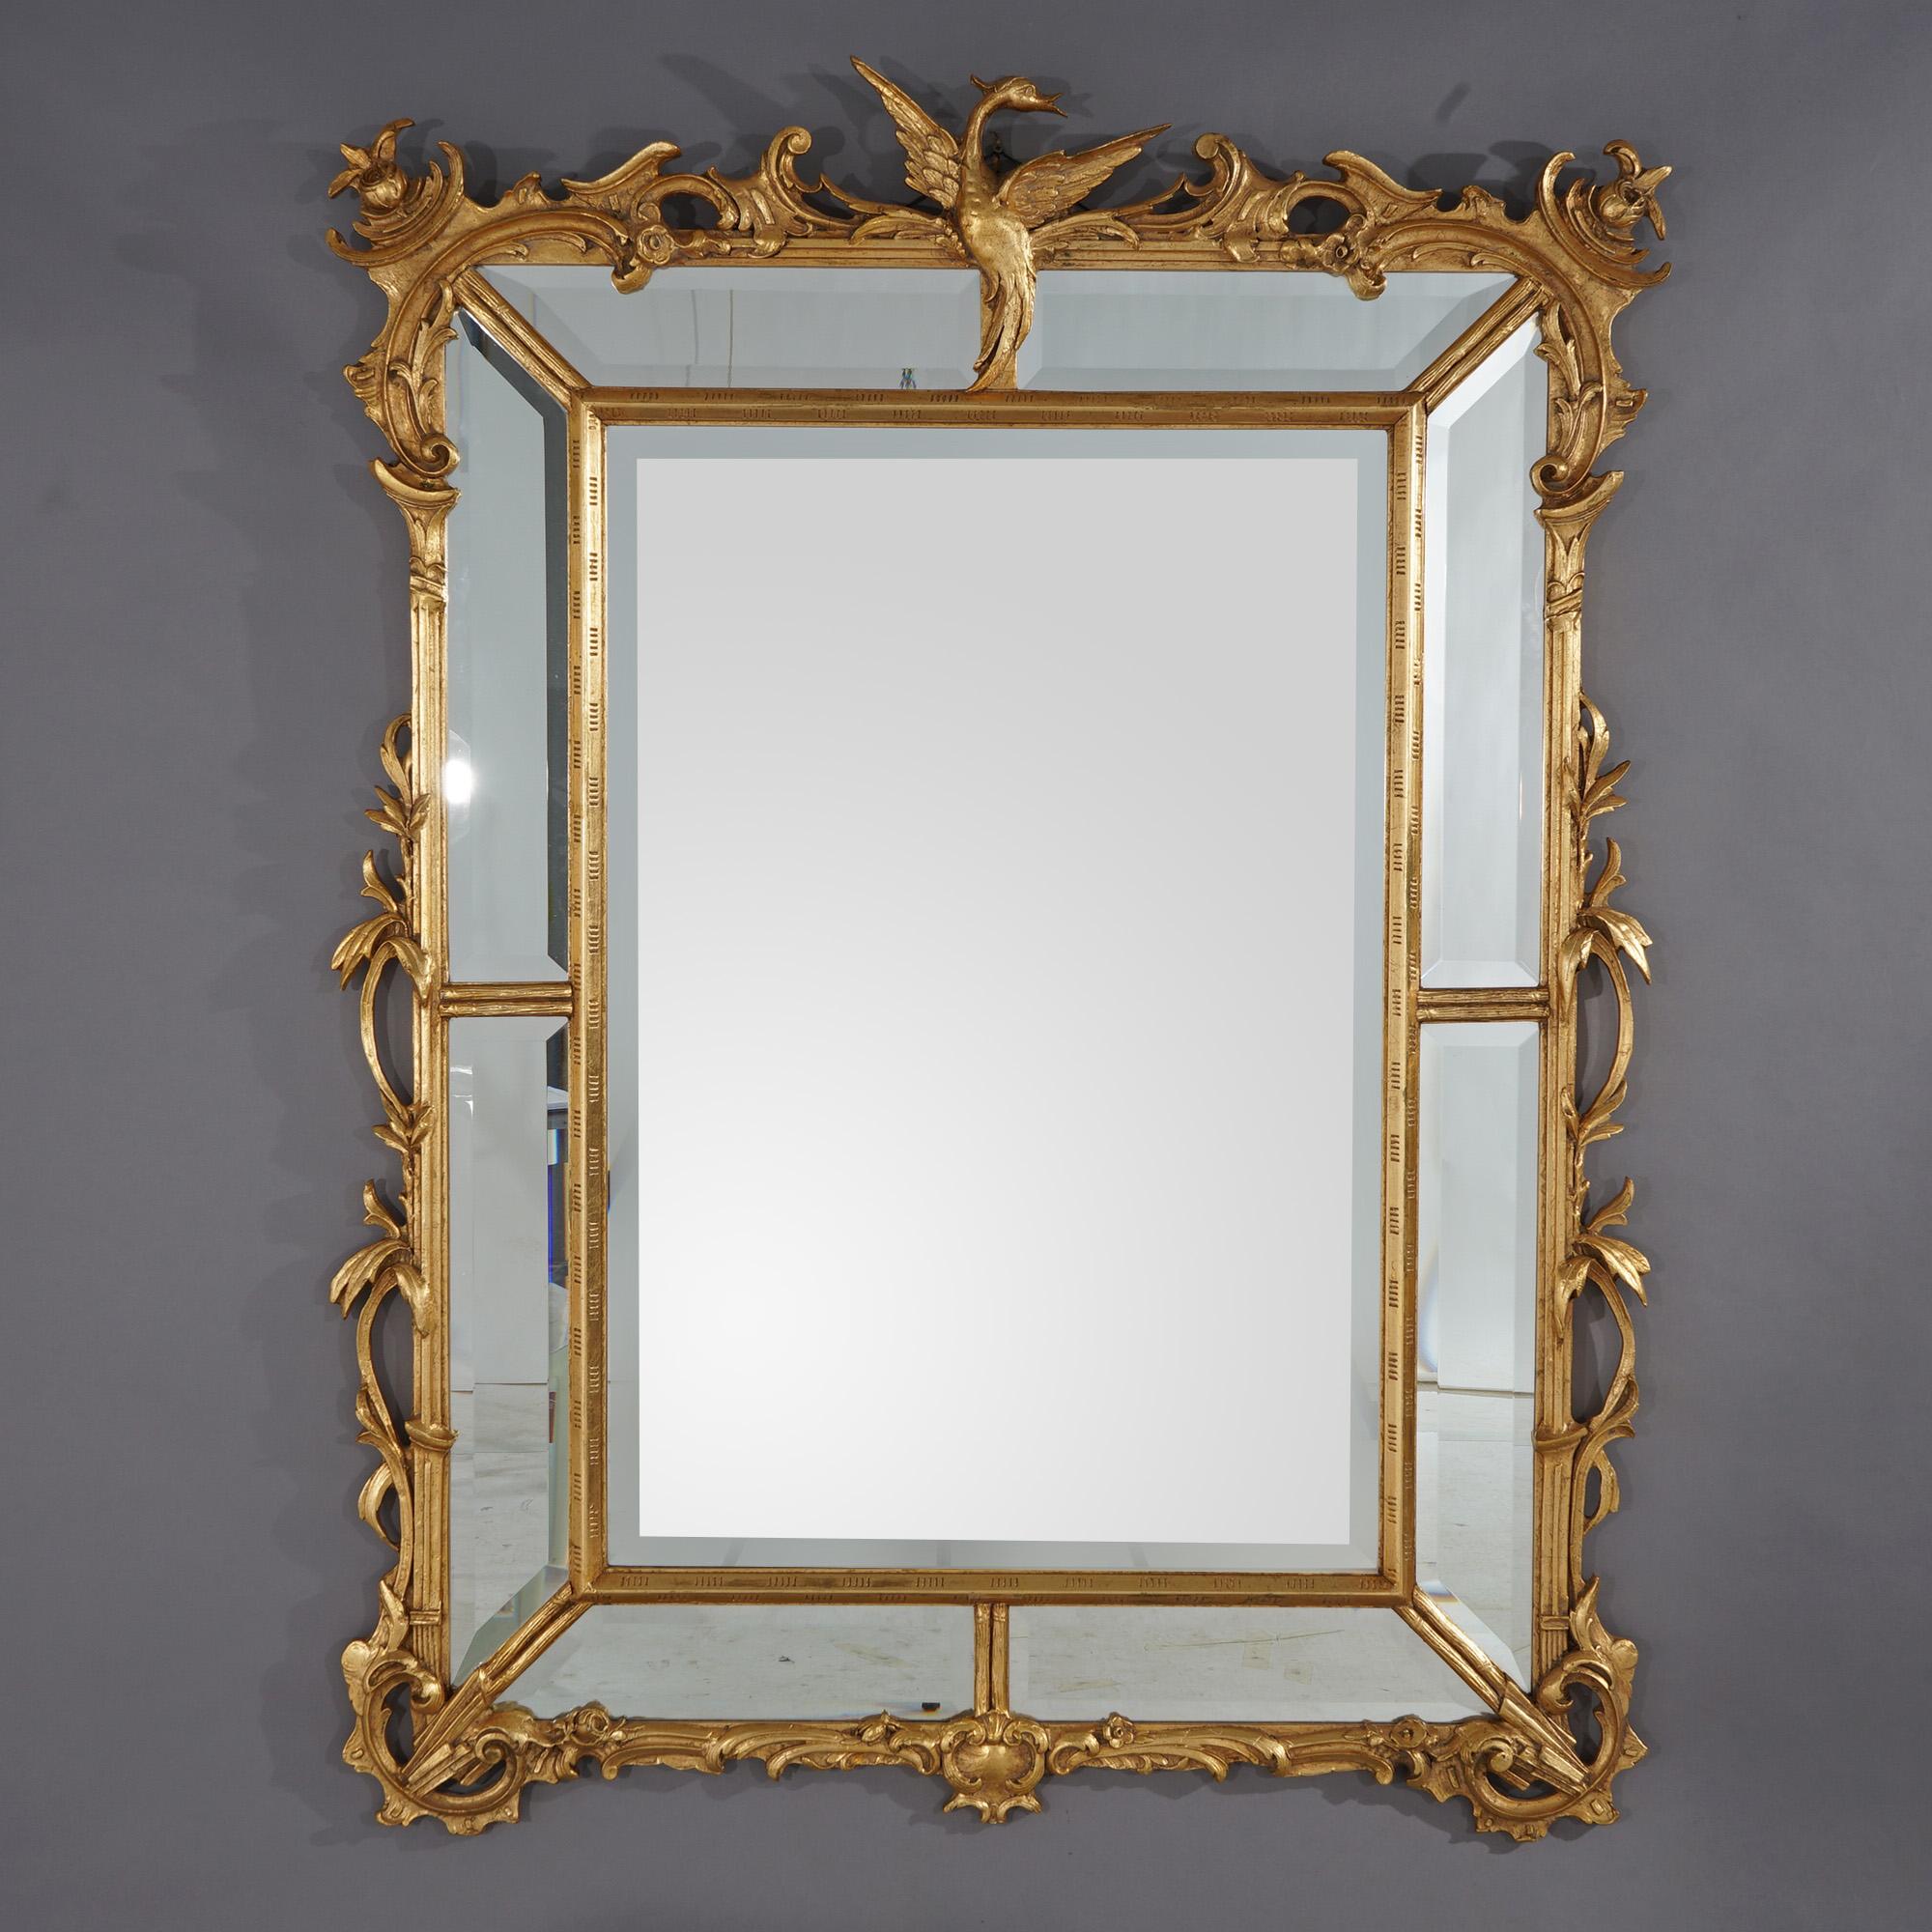 A figural parclose Chinese Chippendale wall mirror offers giltwood construction with phoenix finial over stylized scroll and foliate frame housing beveled mirror plates, 20th century

Measures - 58.5